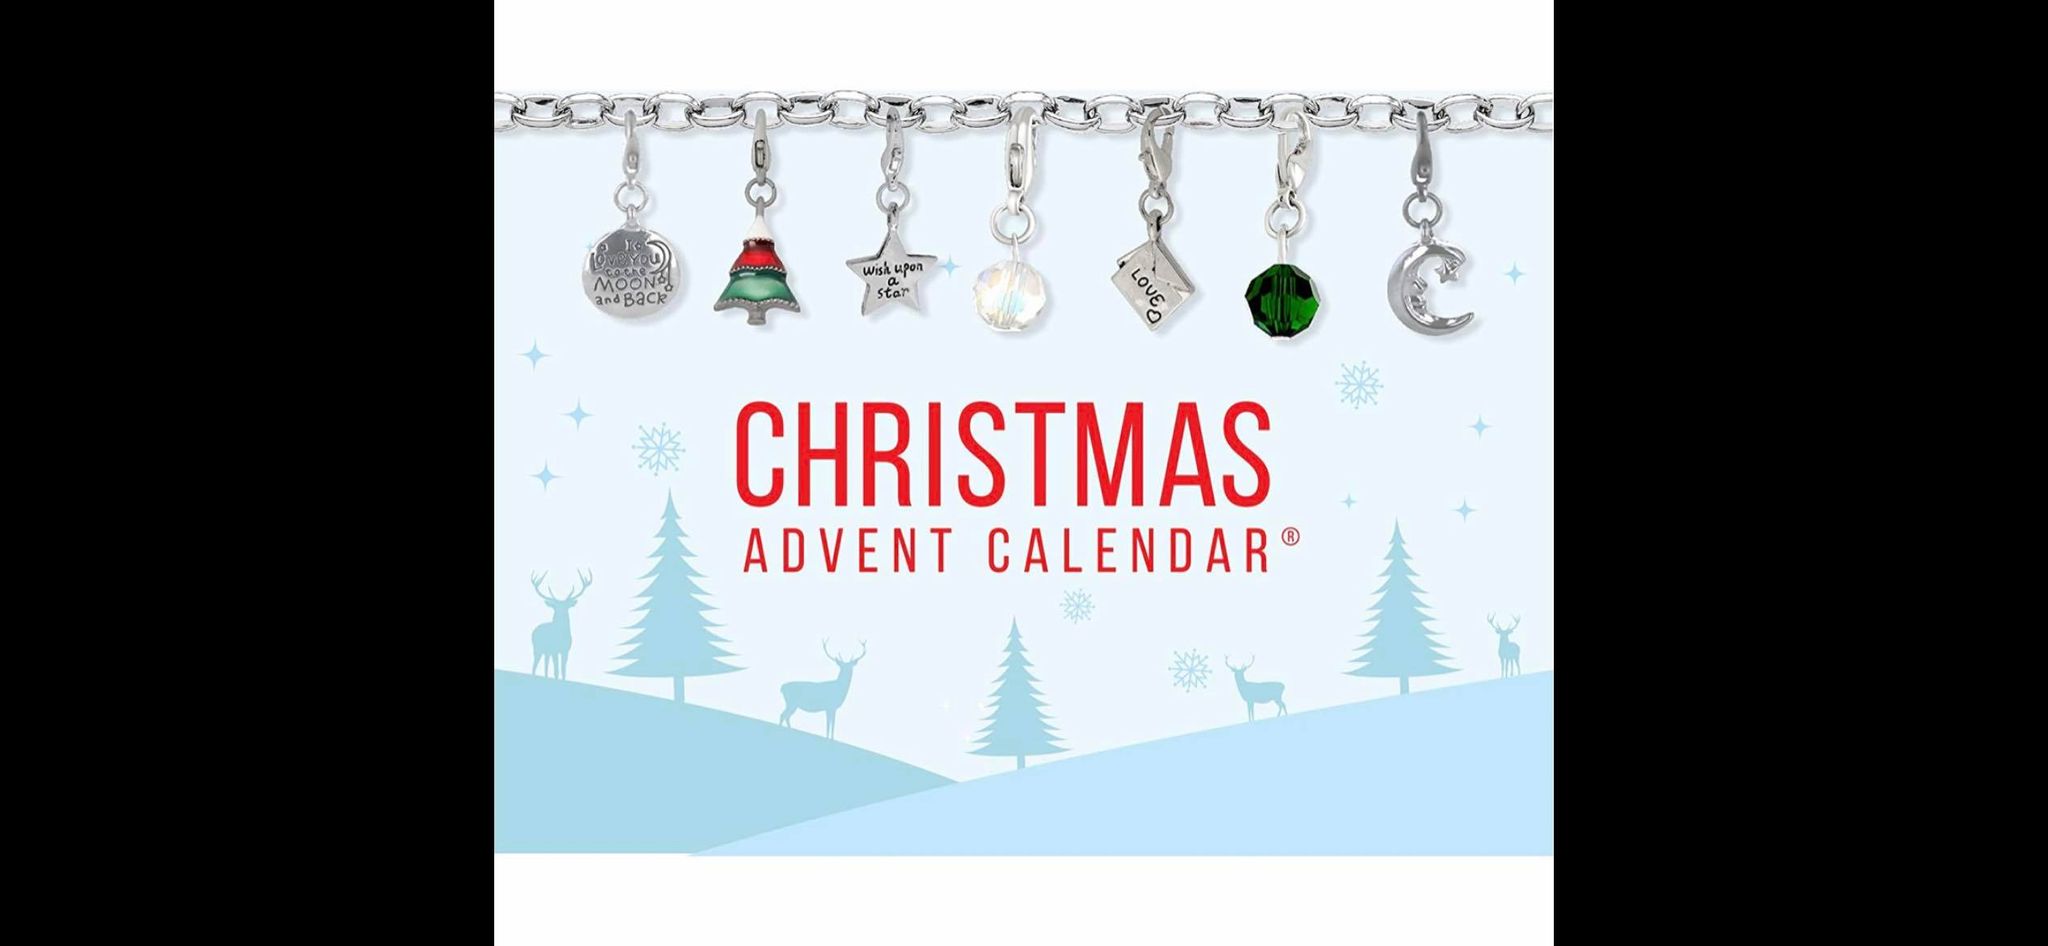 Charm Advent Calendar Christmas Cheer 22 Charms with 1 Bracelet and 1 Necklace